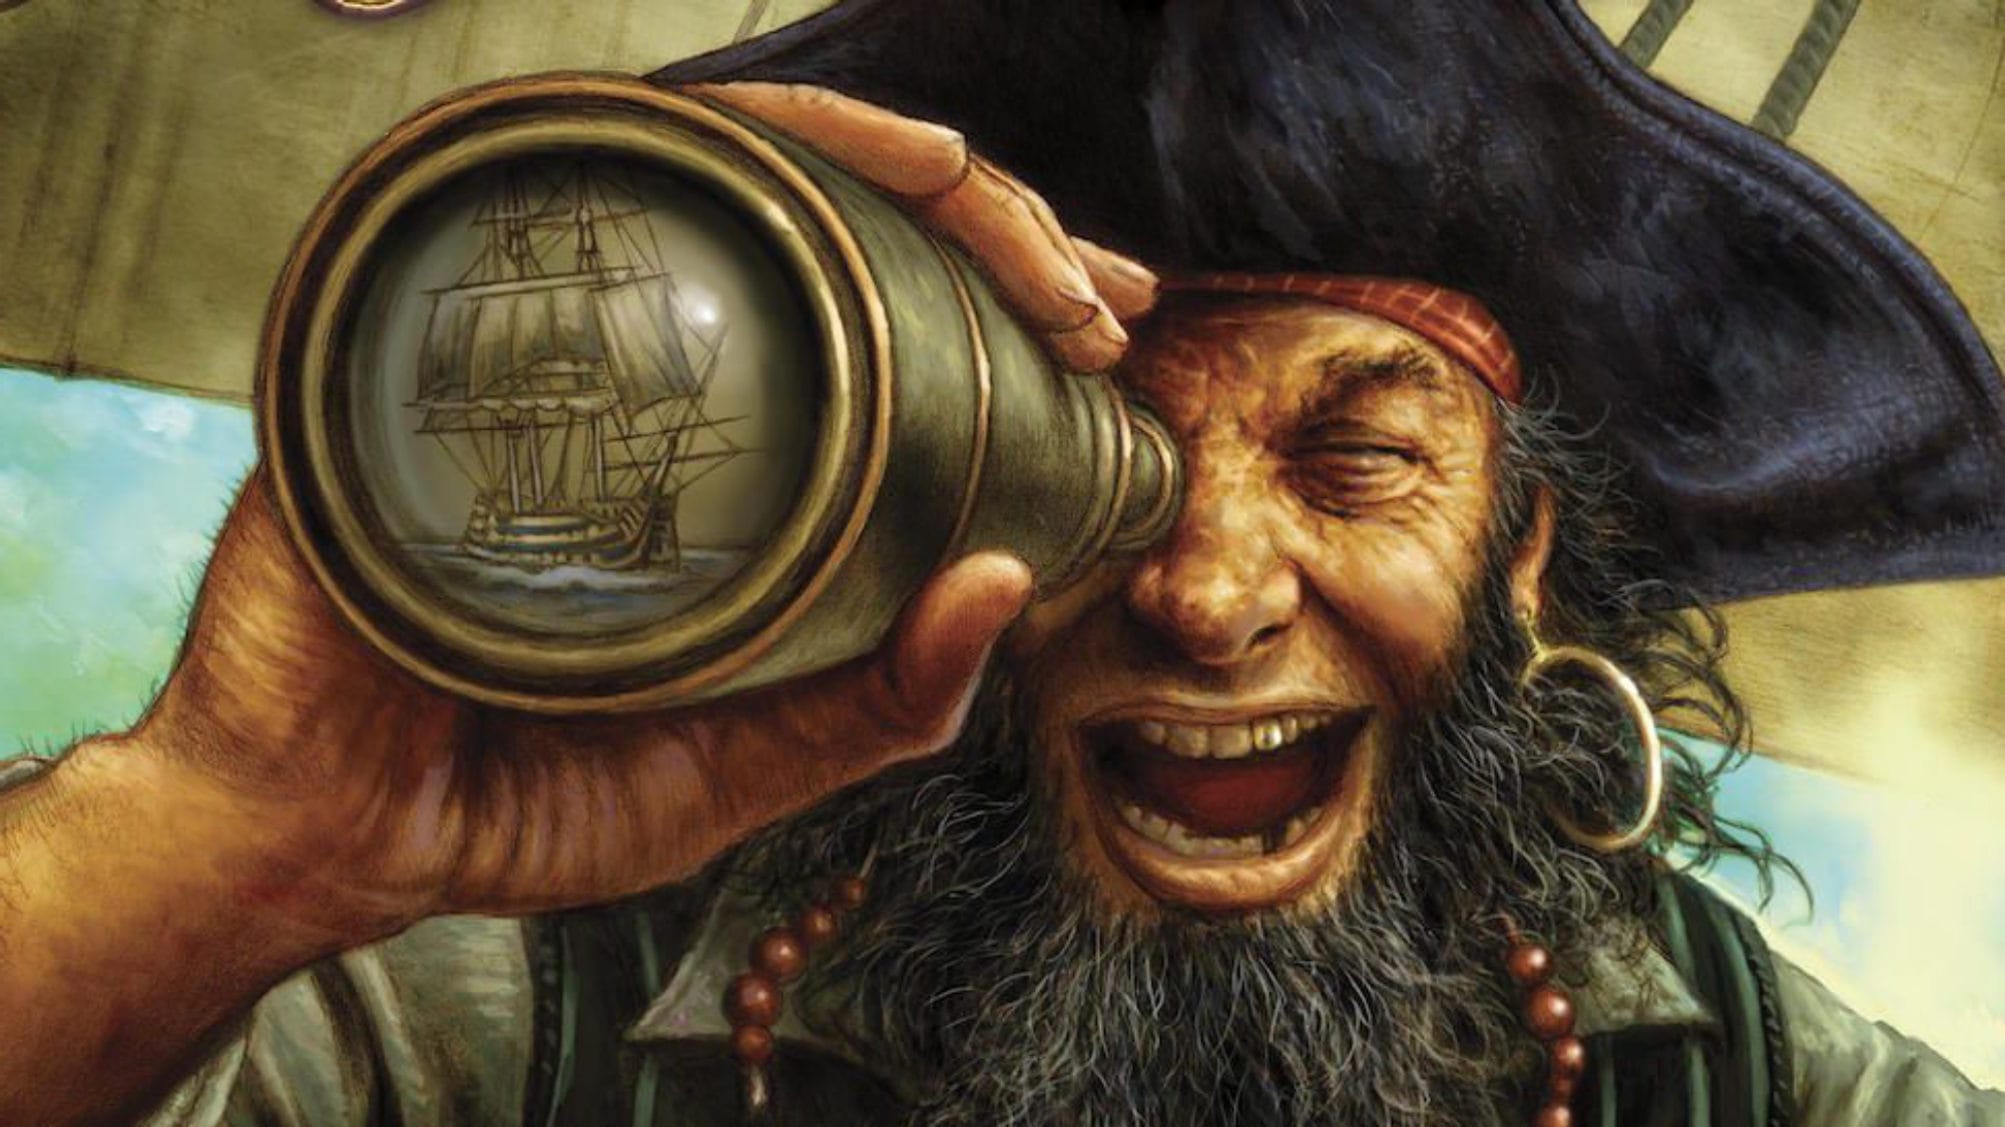 Pirates believed wearing earing's would improve their eye sight